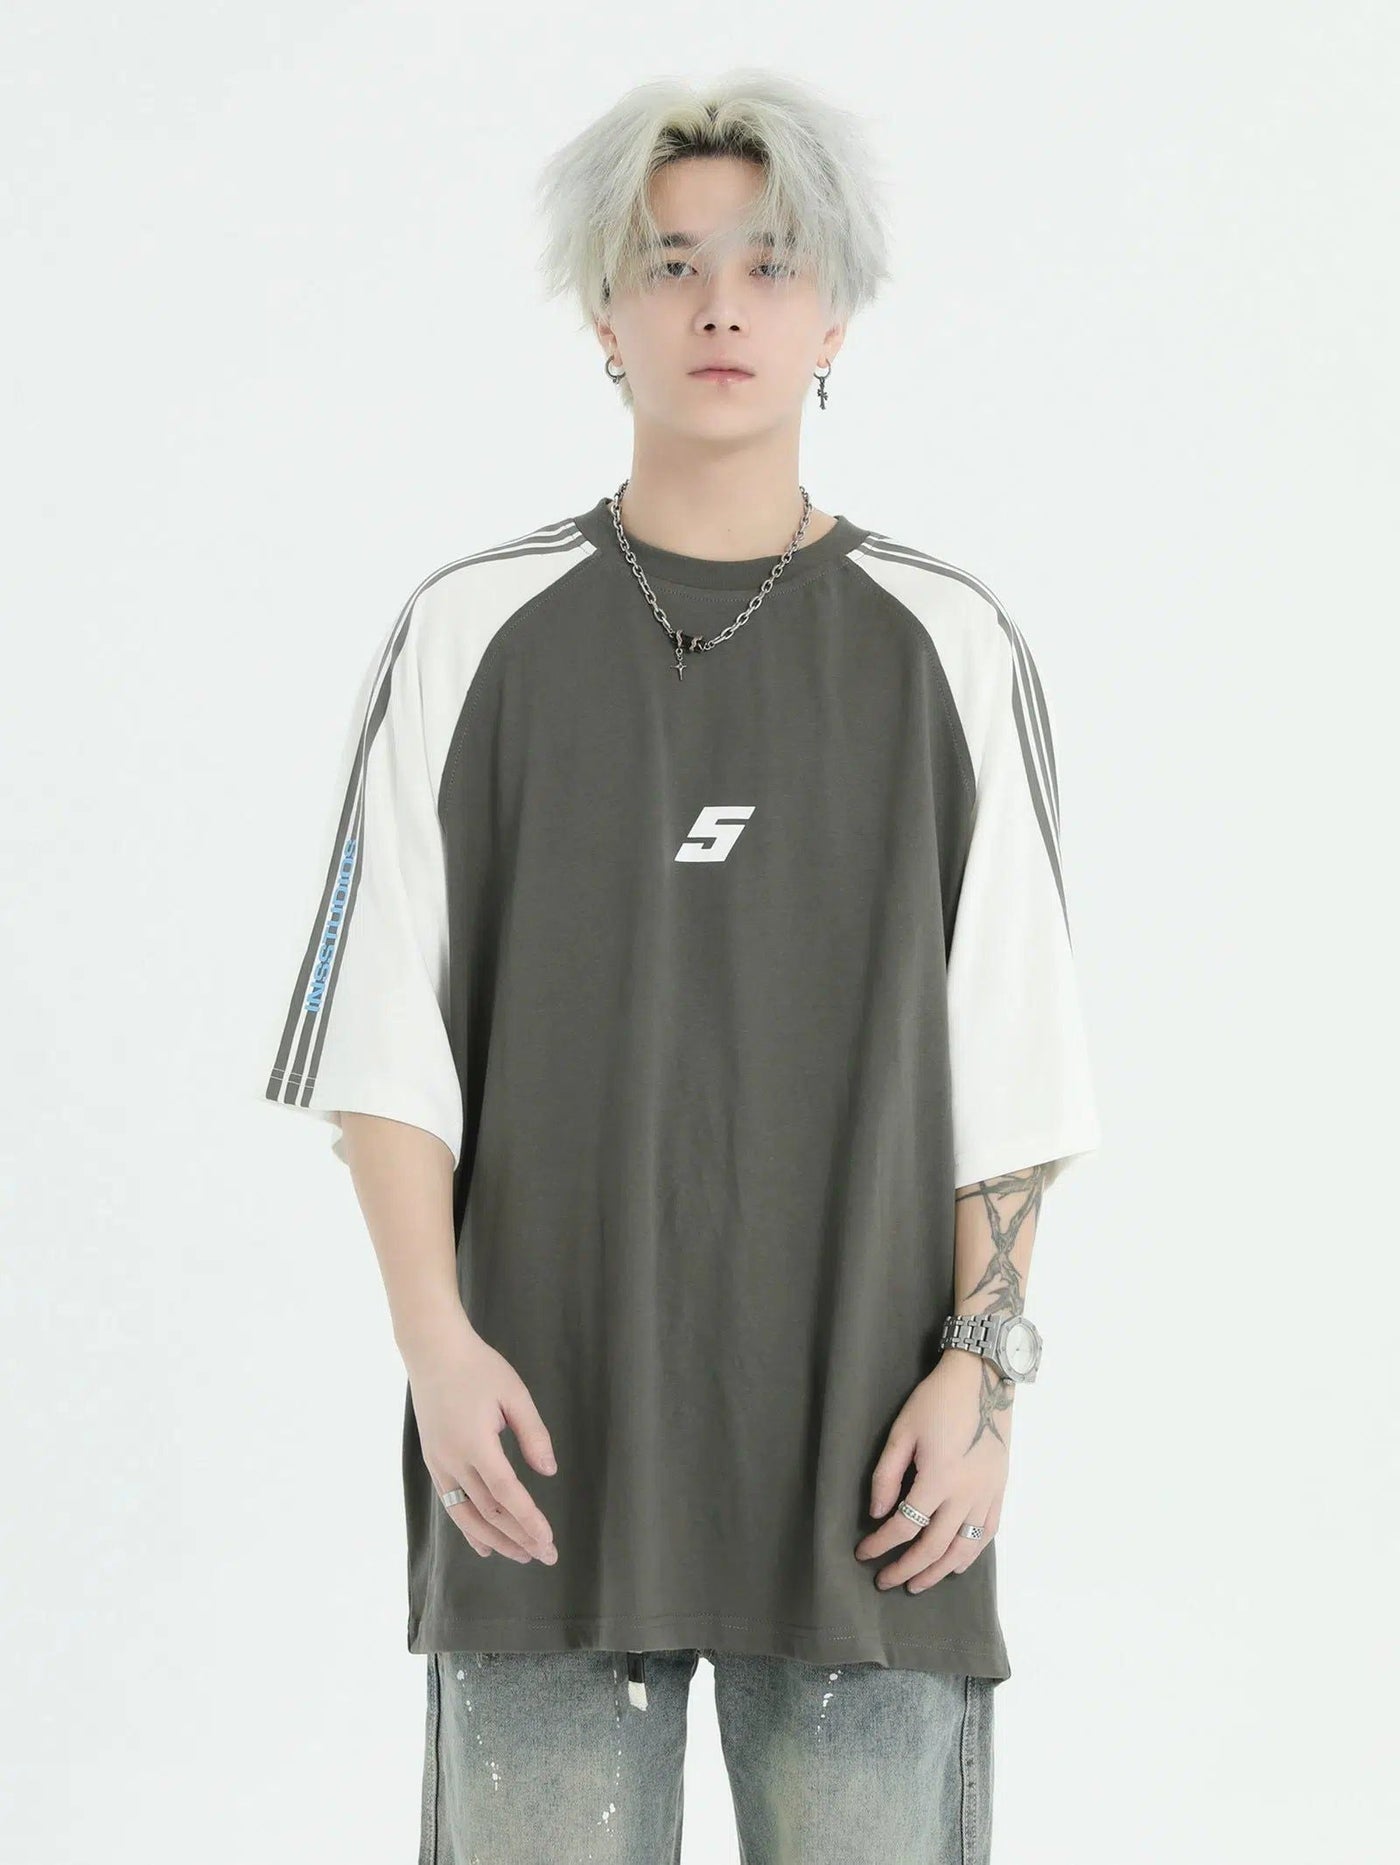 Spliced Contrast and Lines T-Shirt Korean Street Fashion T-Shirt By INS Korea Shop Online at OH Vault